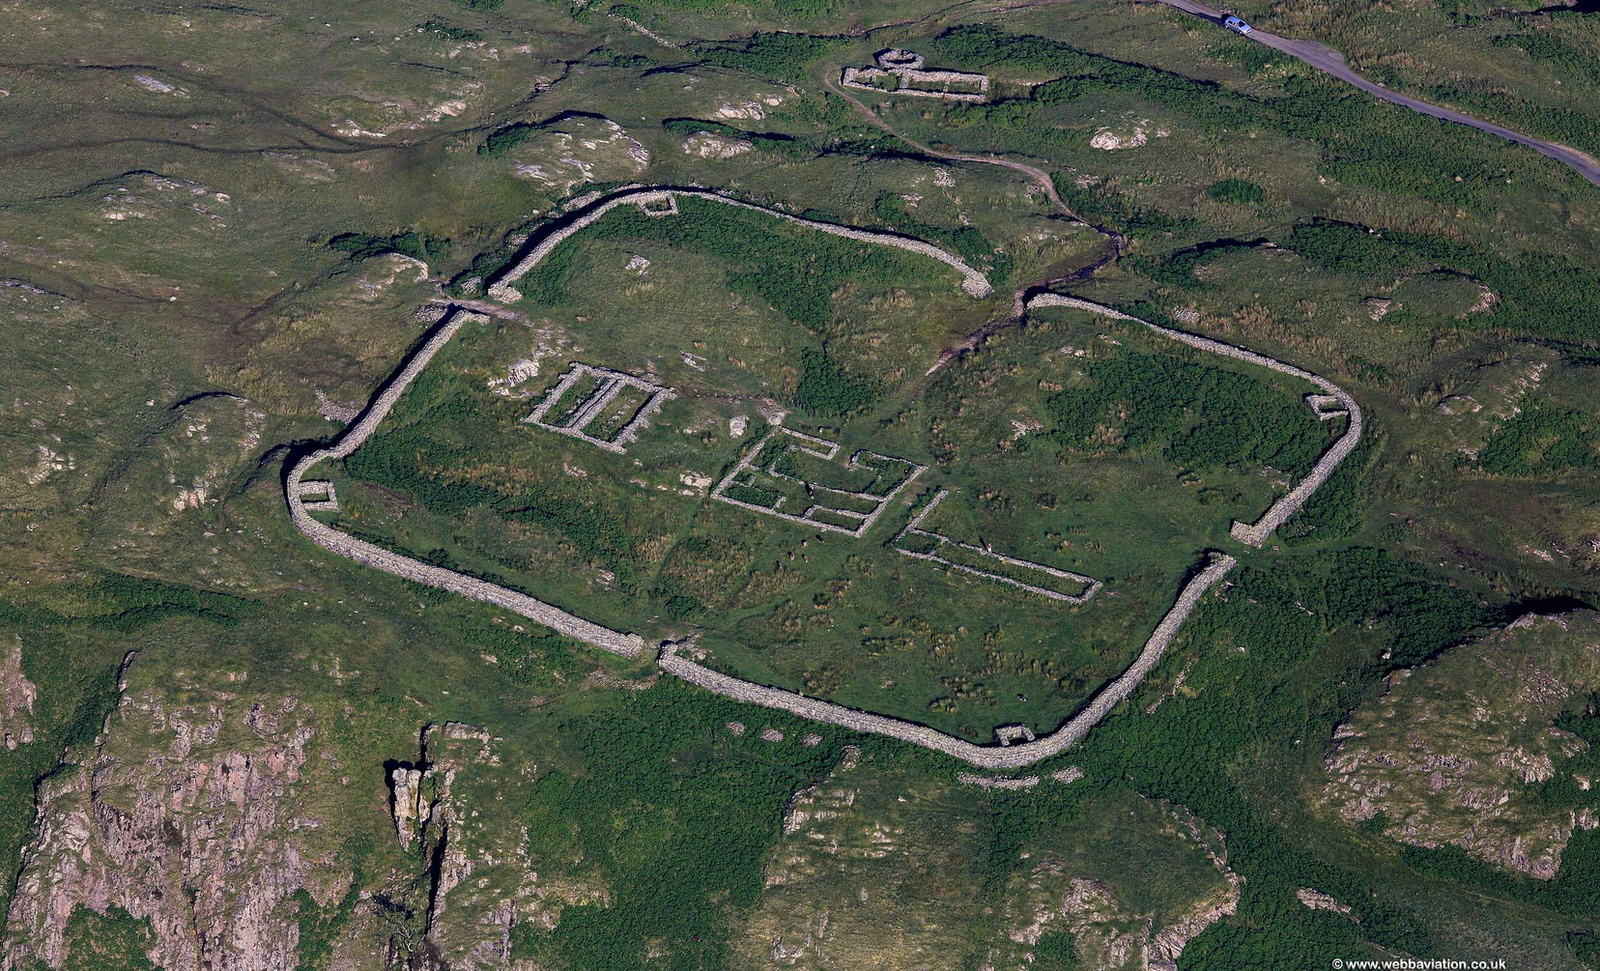 Hardknott Roman Fort ( Mediobogdum ) in the Lake District Cumbria from the air